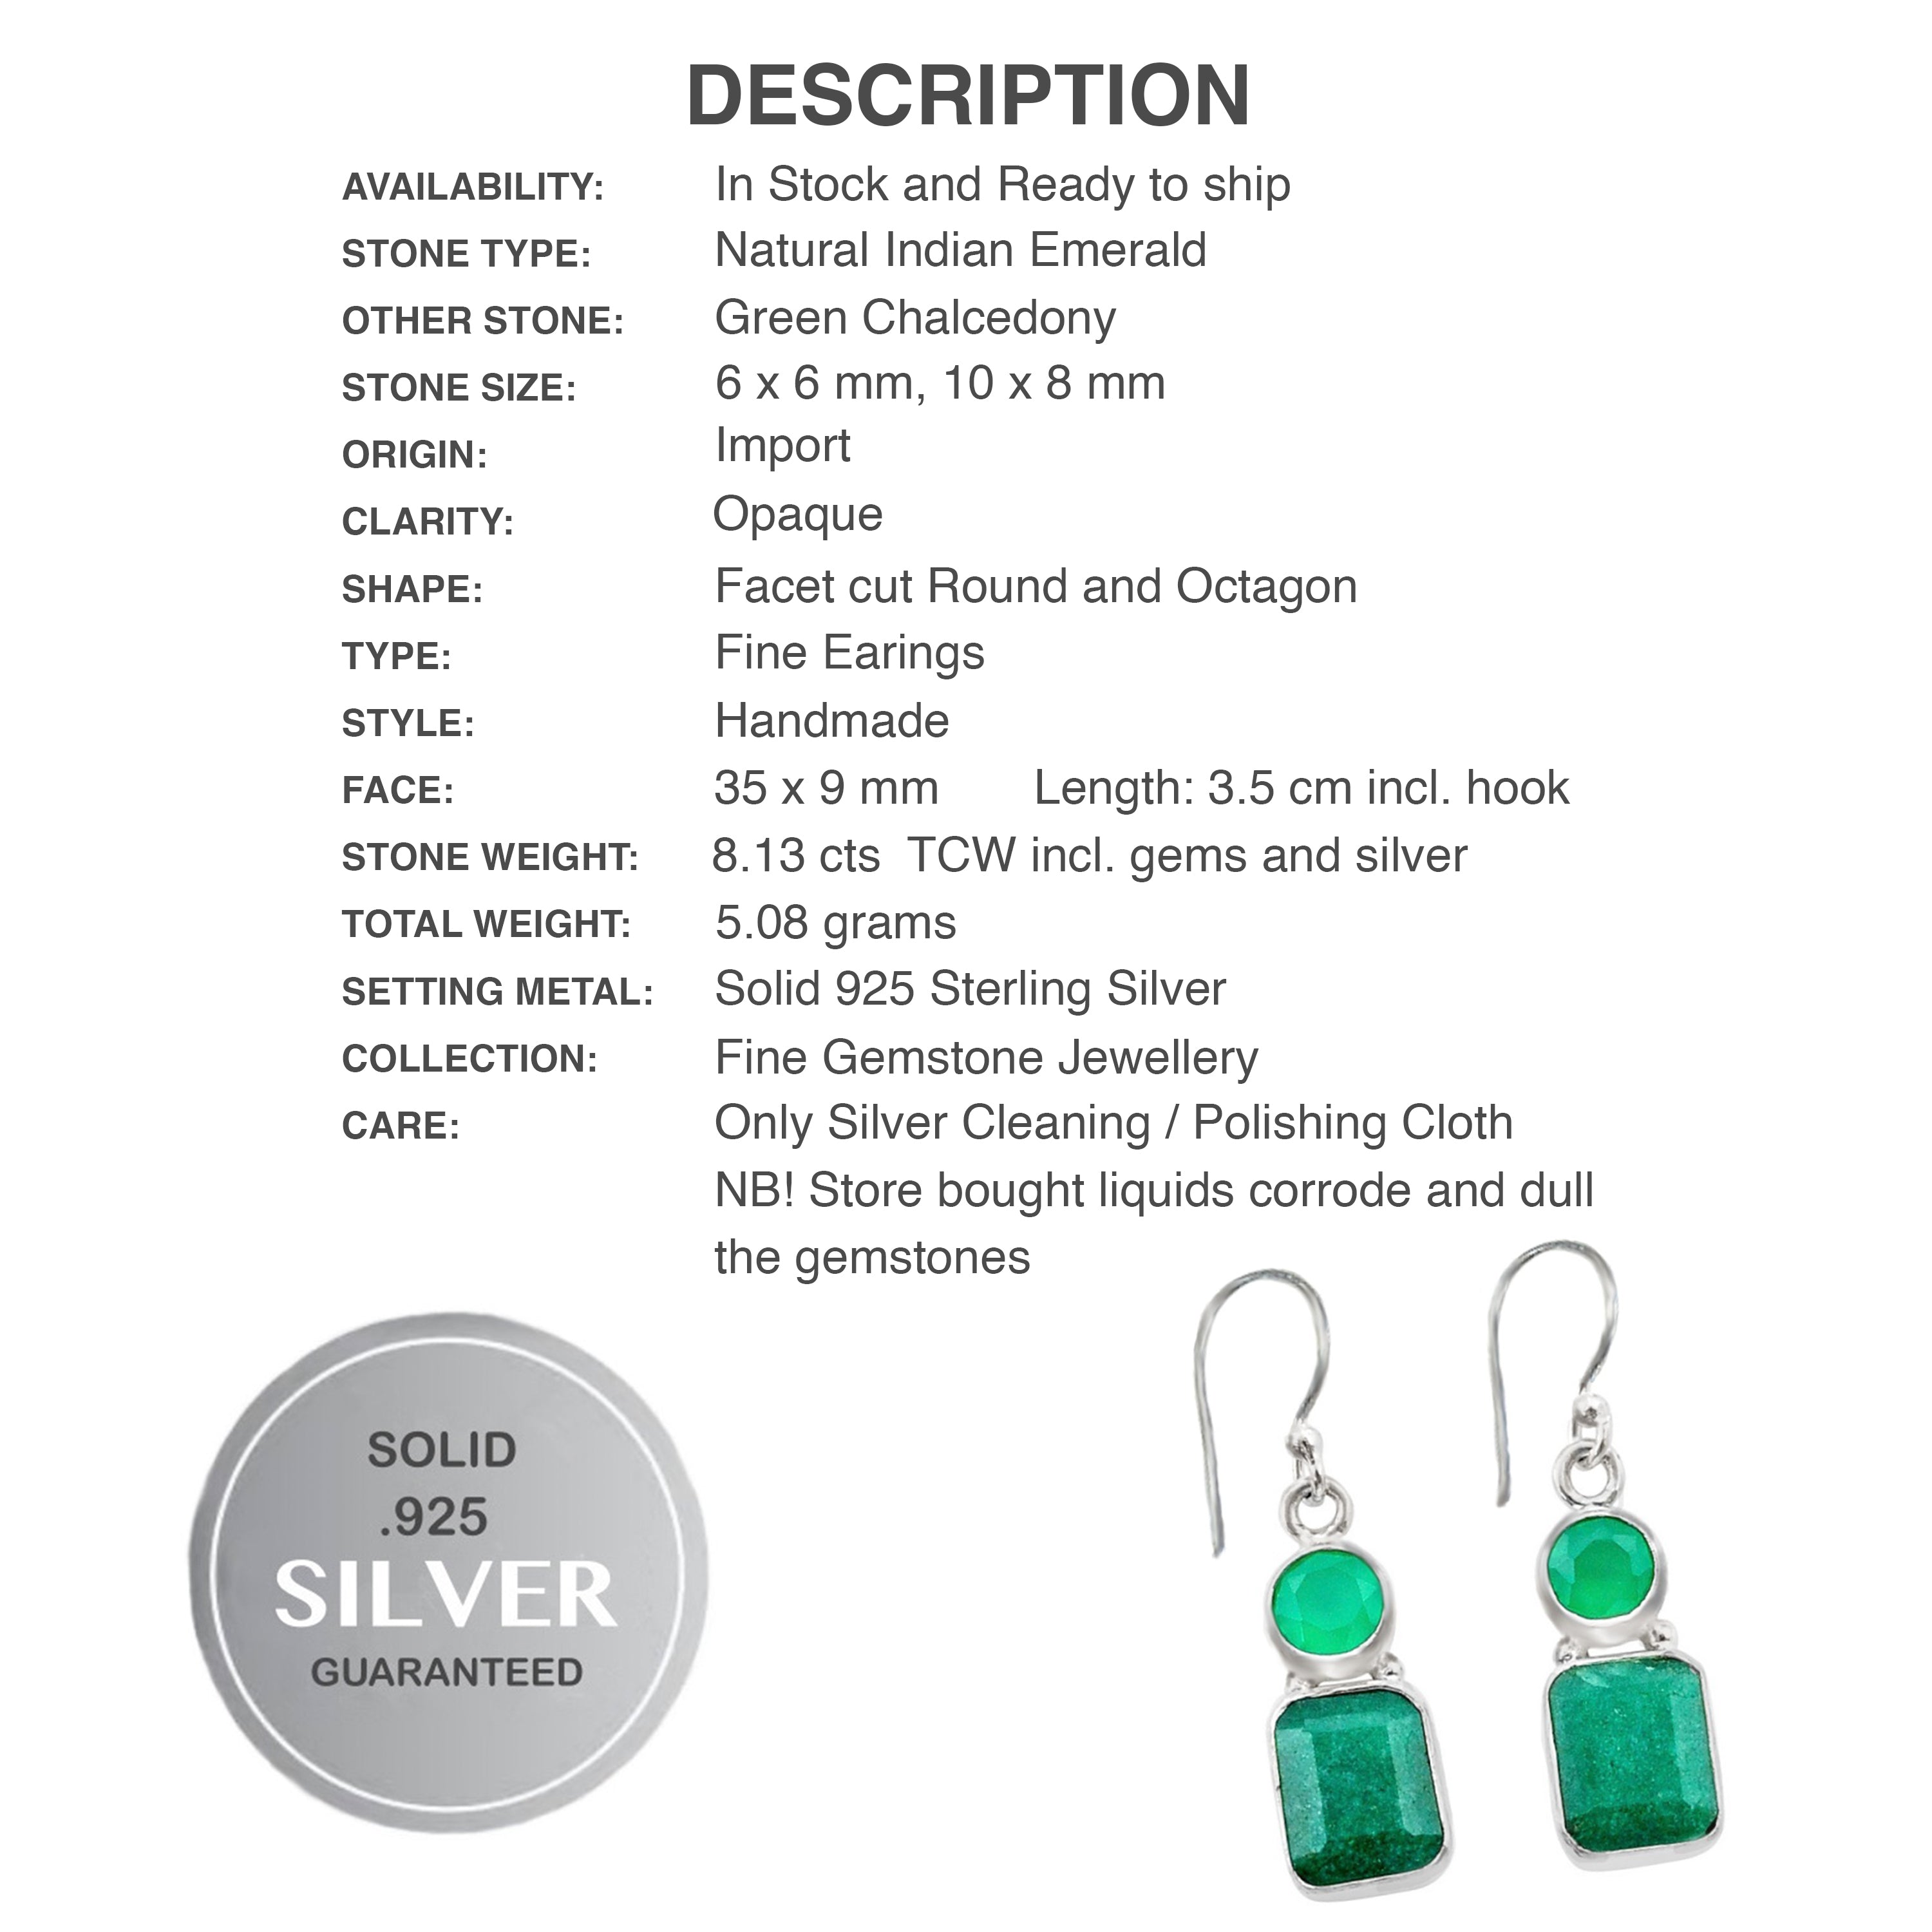 Natural Indian Emerald and Chalcedony Gemstone set in Solid .925 Sterling Silver Earrings - BELLADONNA